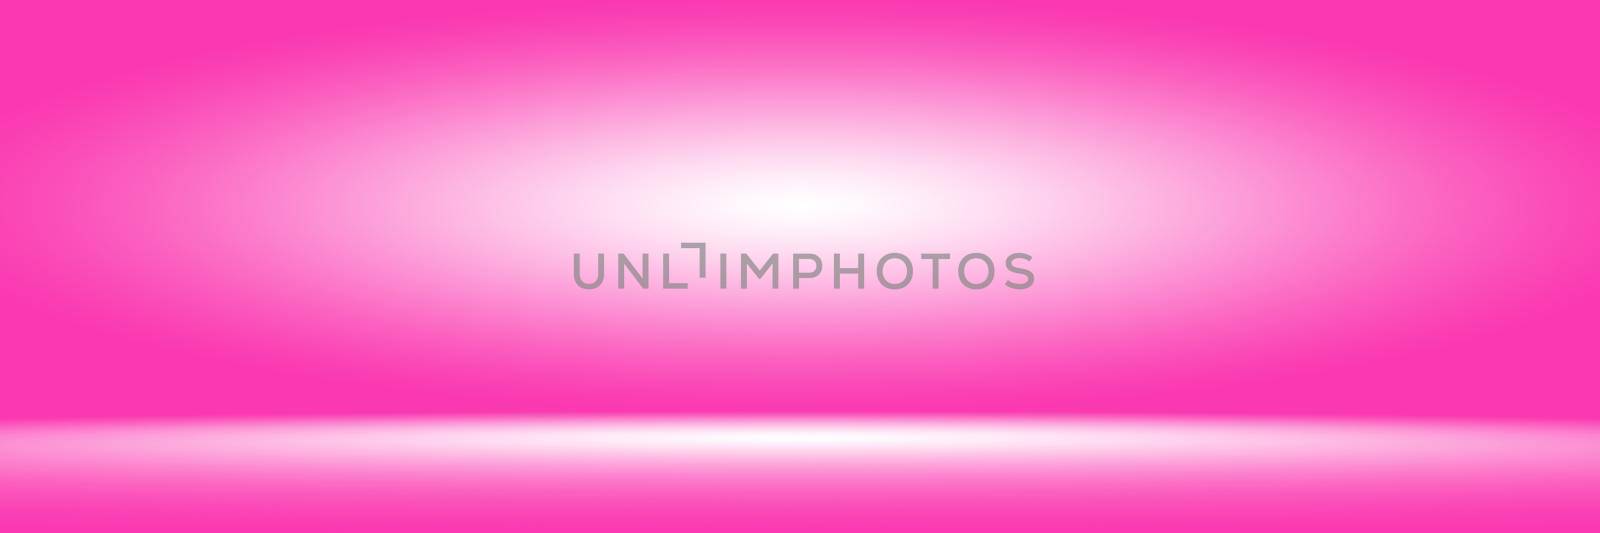 Abstact photographic Pink Gradient studio backdrop Background